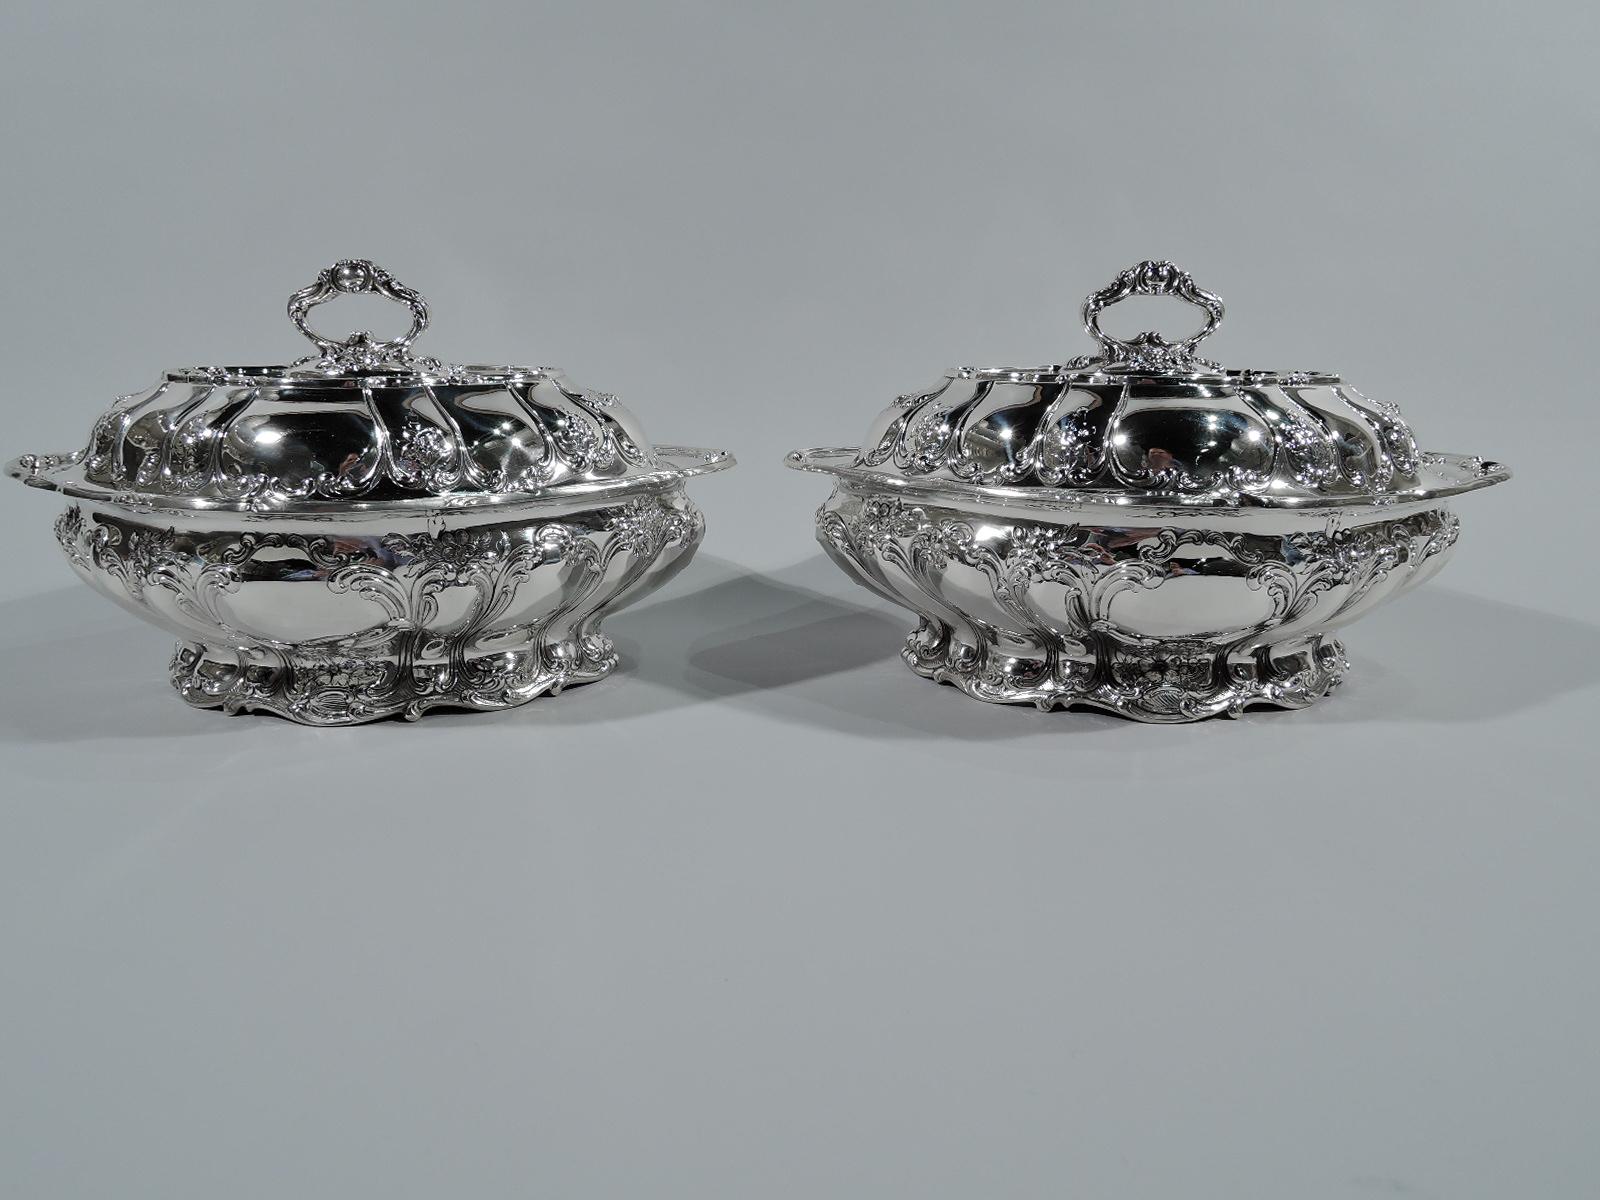 Pair of Chantilly sterling silver covered vegetable dishes. Made by Gorham in Providence in 1899. Each: Bellied lozenge bowl with scrolled everted rim and raised ovalish foot. Raised cover with twist-lock scrolled ring handle for conversion to